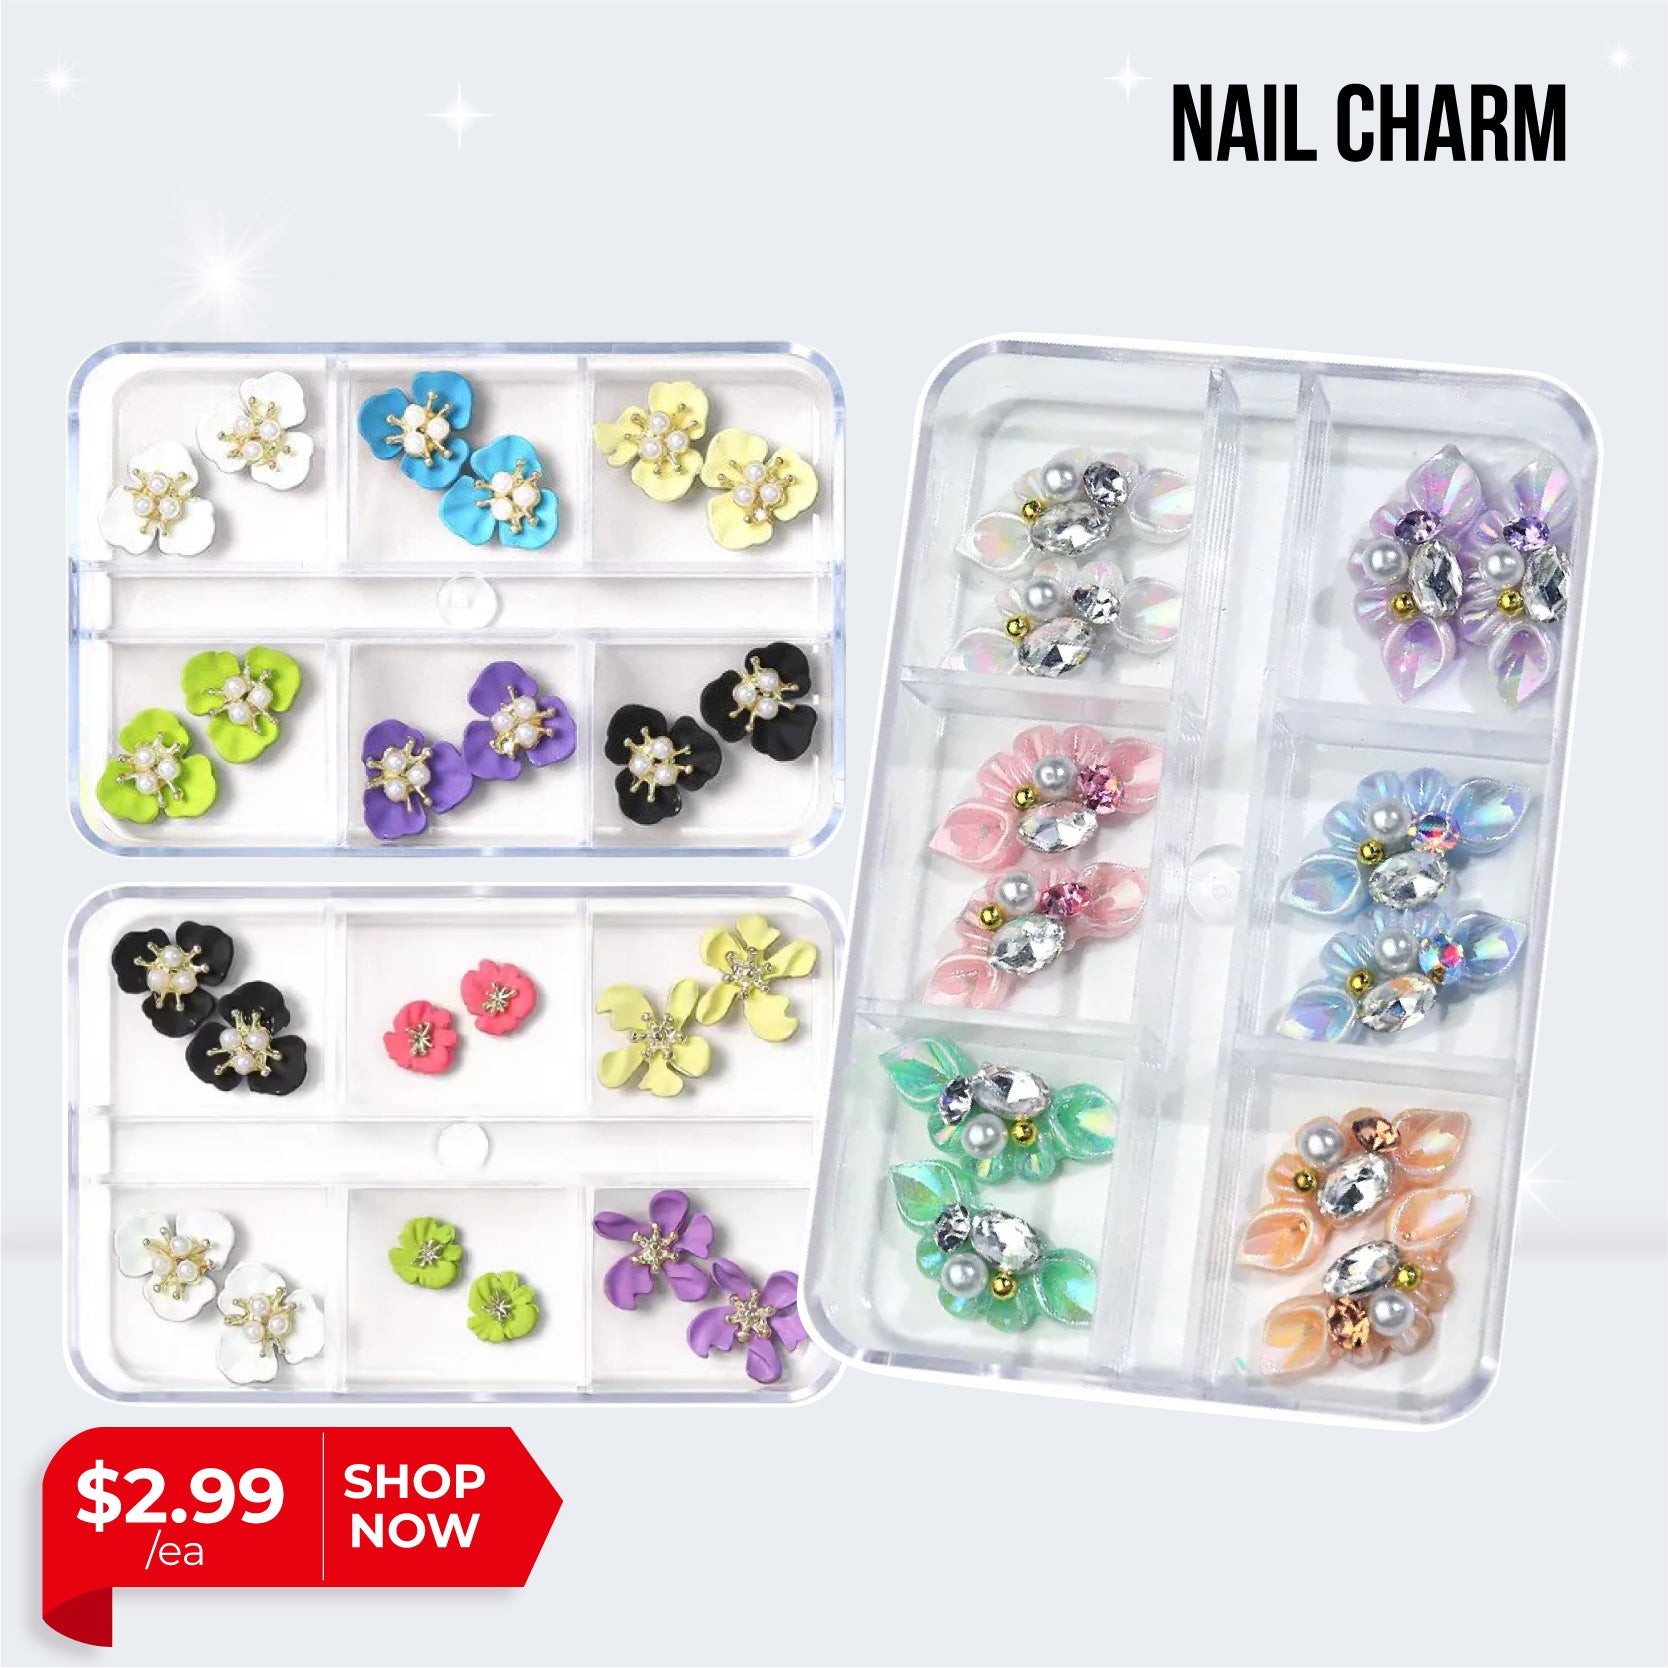 Buy S.A.V.I 3D Shell Flower, Nail Art Palette Decorations, 12 Grids Arora  Bow Butterfly, Nail decorations Art Accessories Jewelry DIY For Manicure  Design Accessories Online at Low Prices in India - Amazon.in